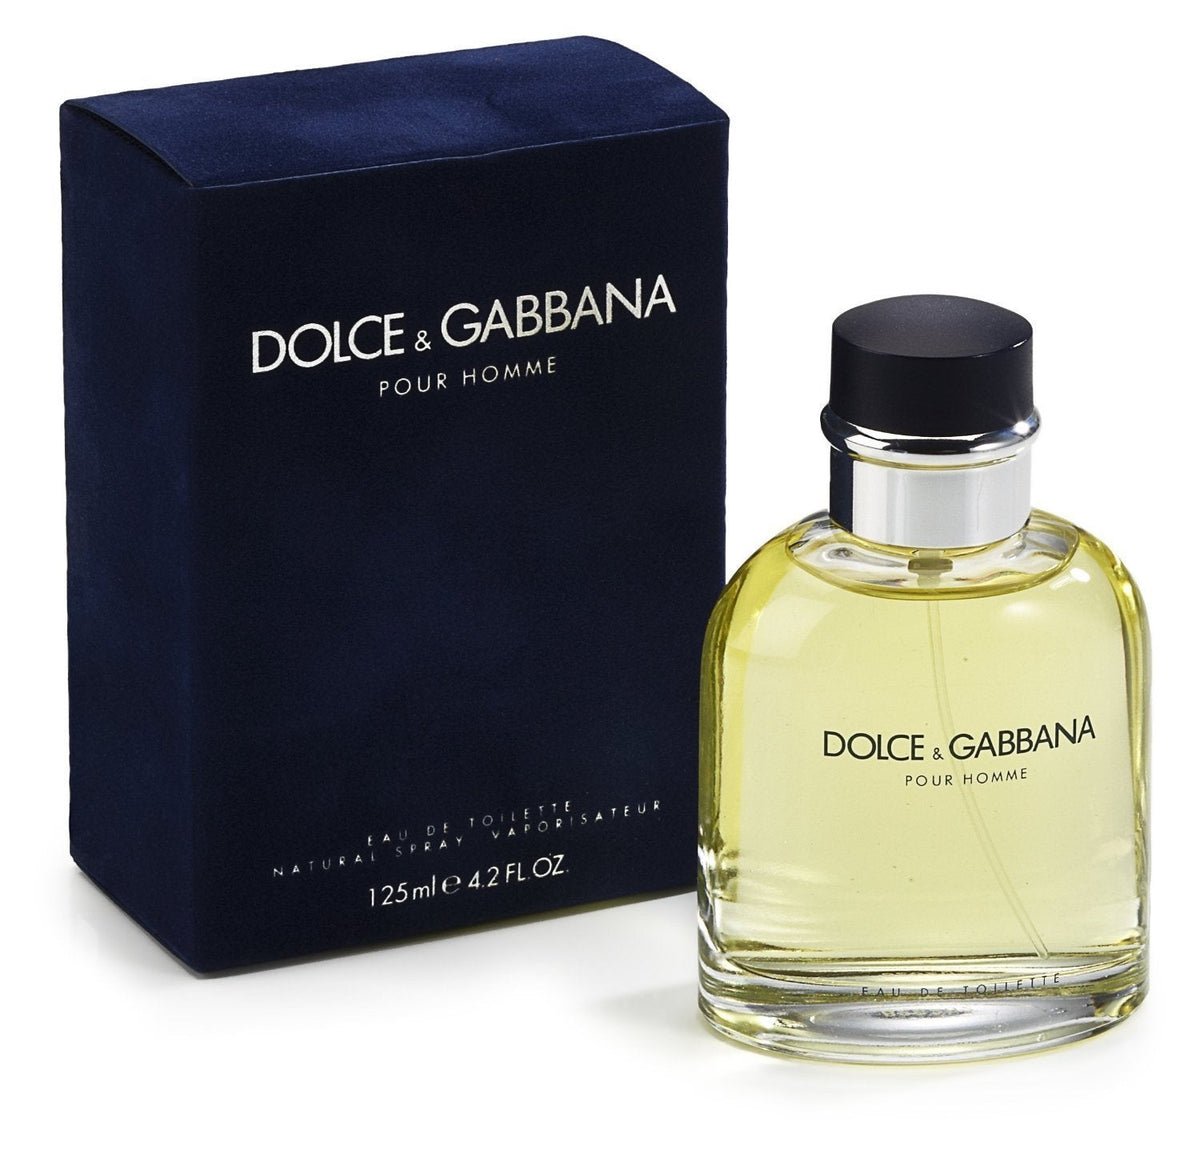 Pour Homme by Dolce & gabbana